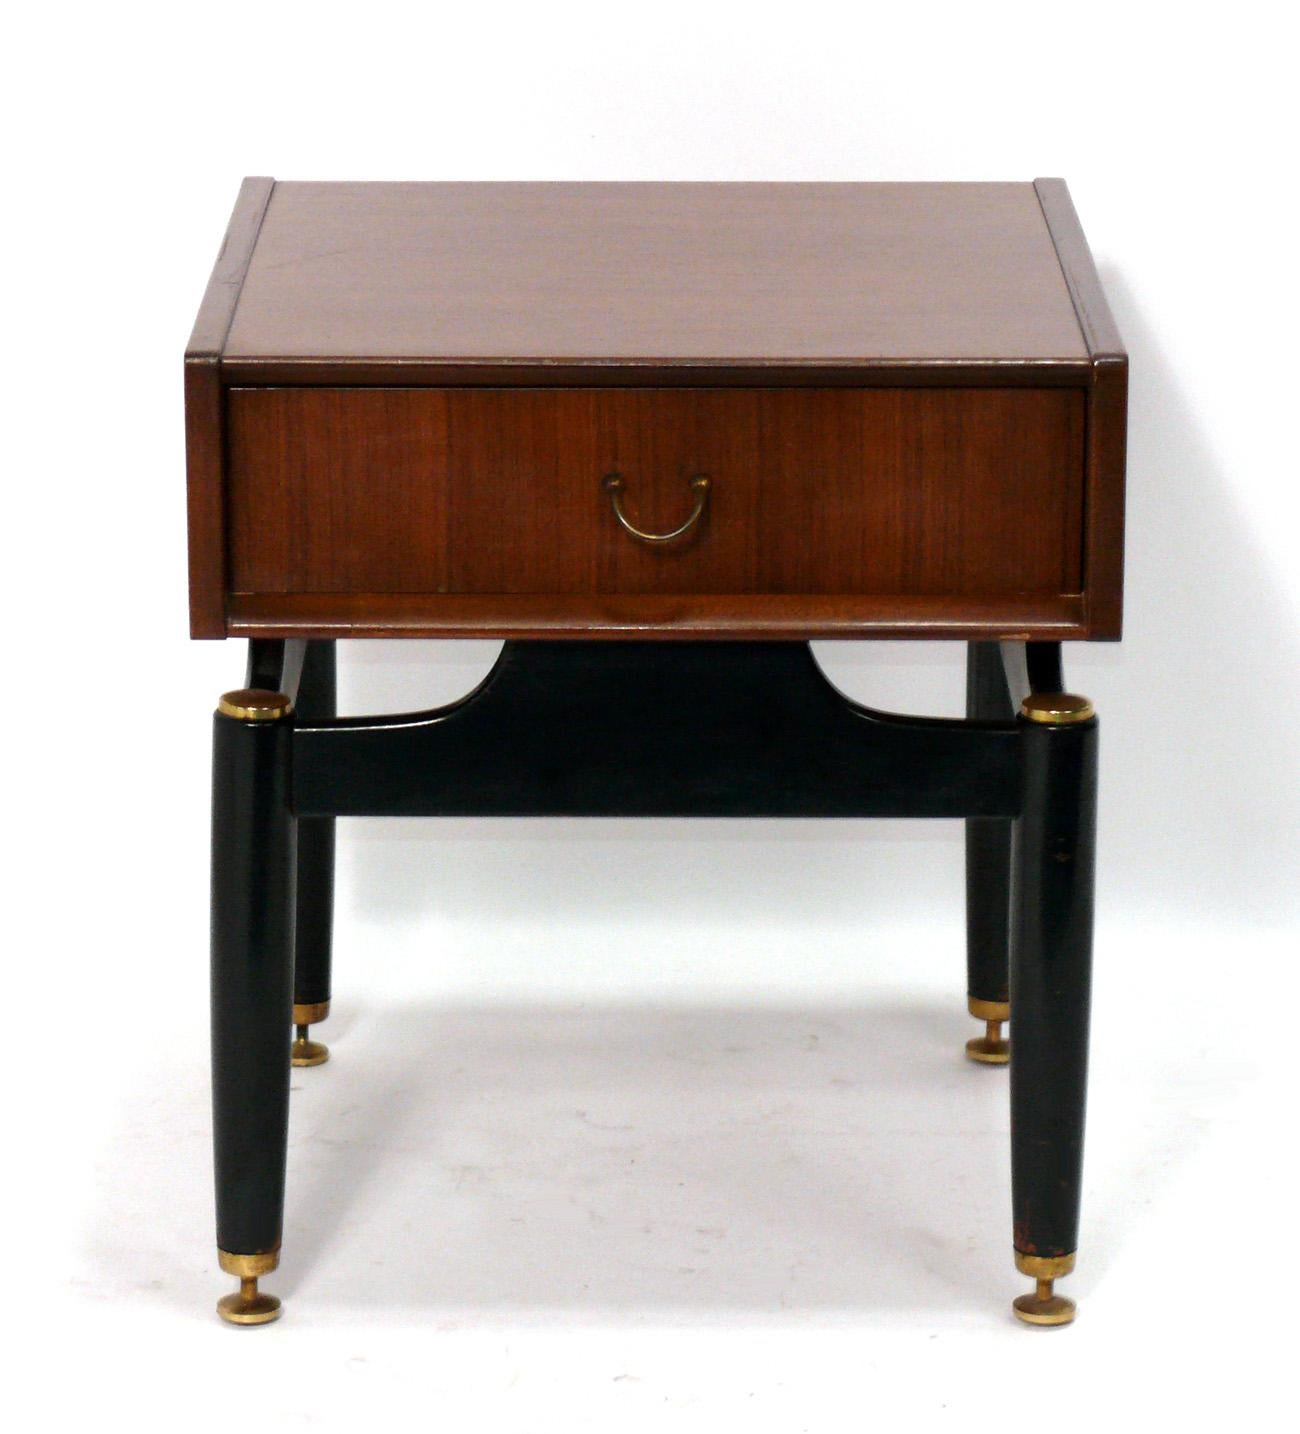 Danish Modern night stands or end tables, made by G Plan Furniture, England, circa 1960s. While located in England, G Plan's designs were clearly influenced by Danish Modern design of the era. They are a versatile size and could be used as